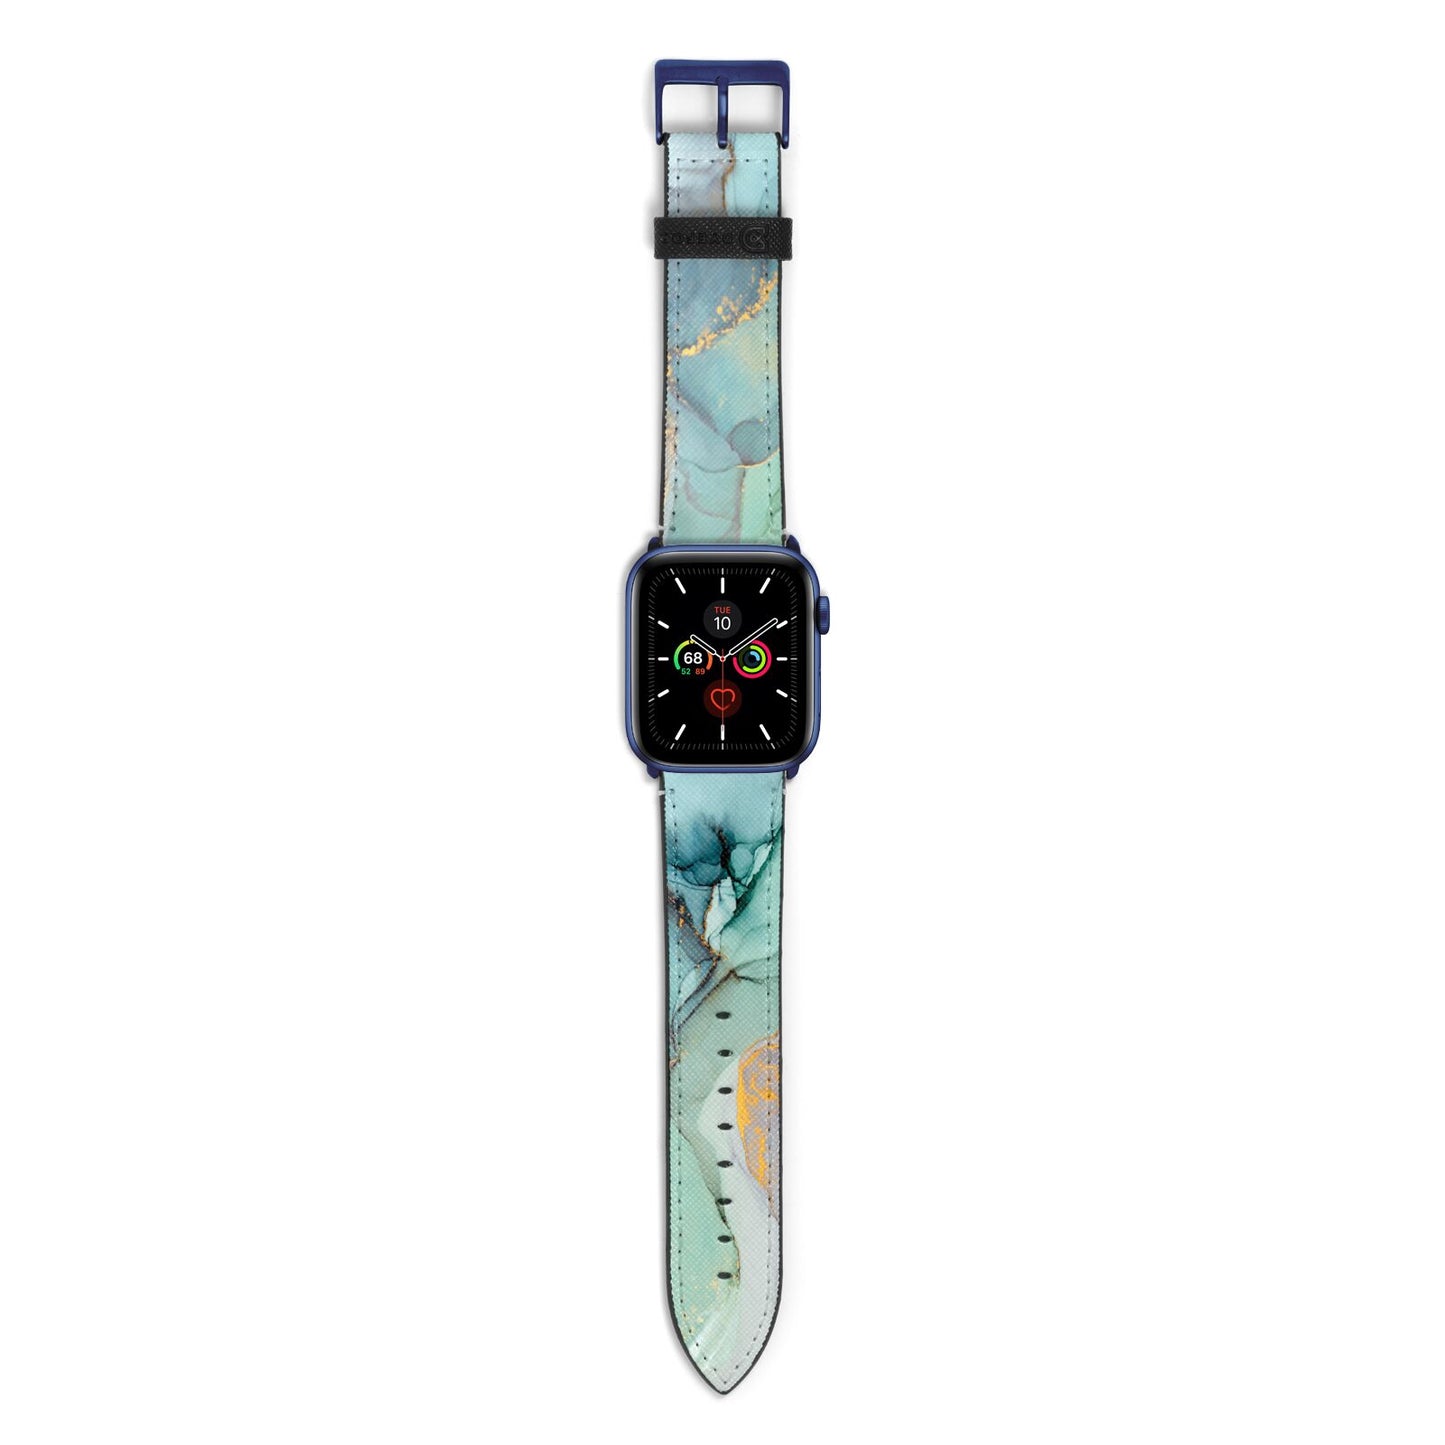 Marble Pattern Apple Watch Strap with Blue Hardware